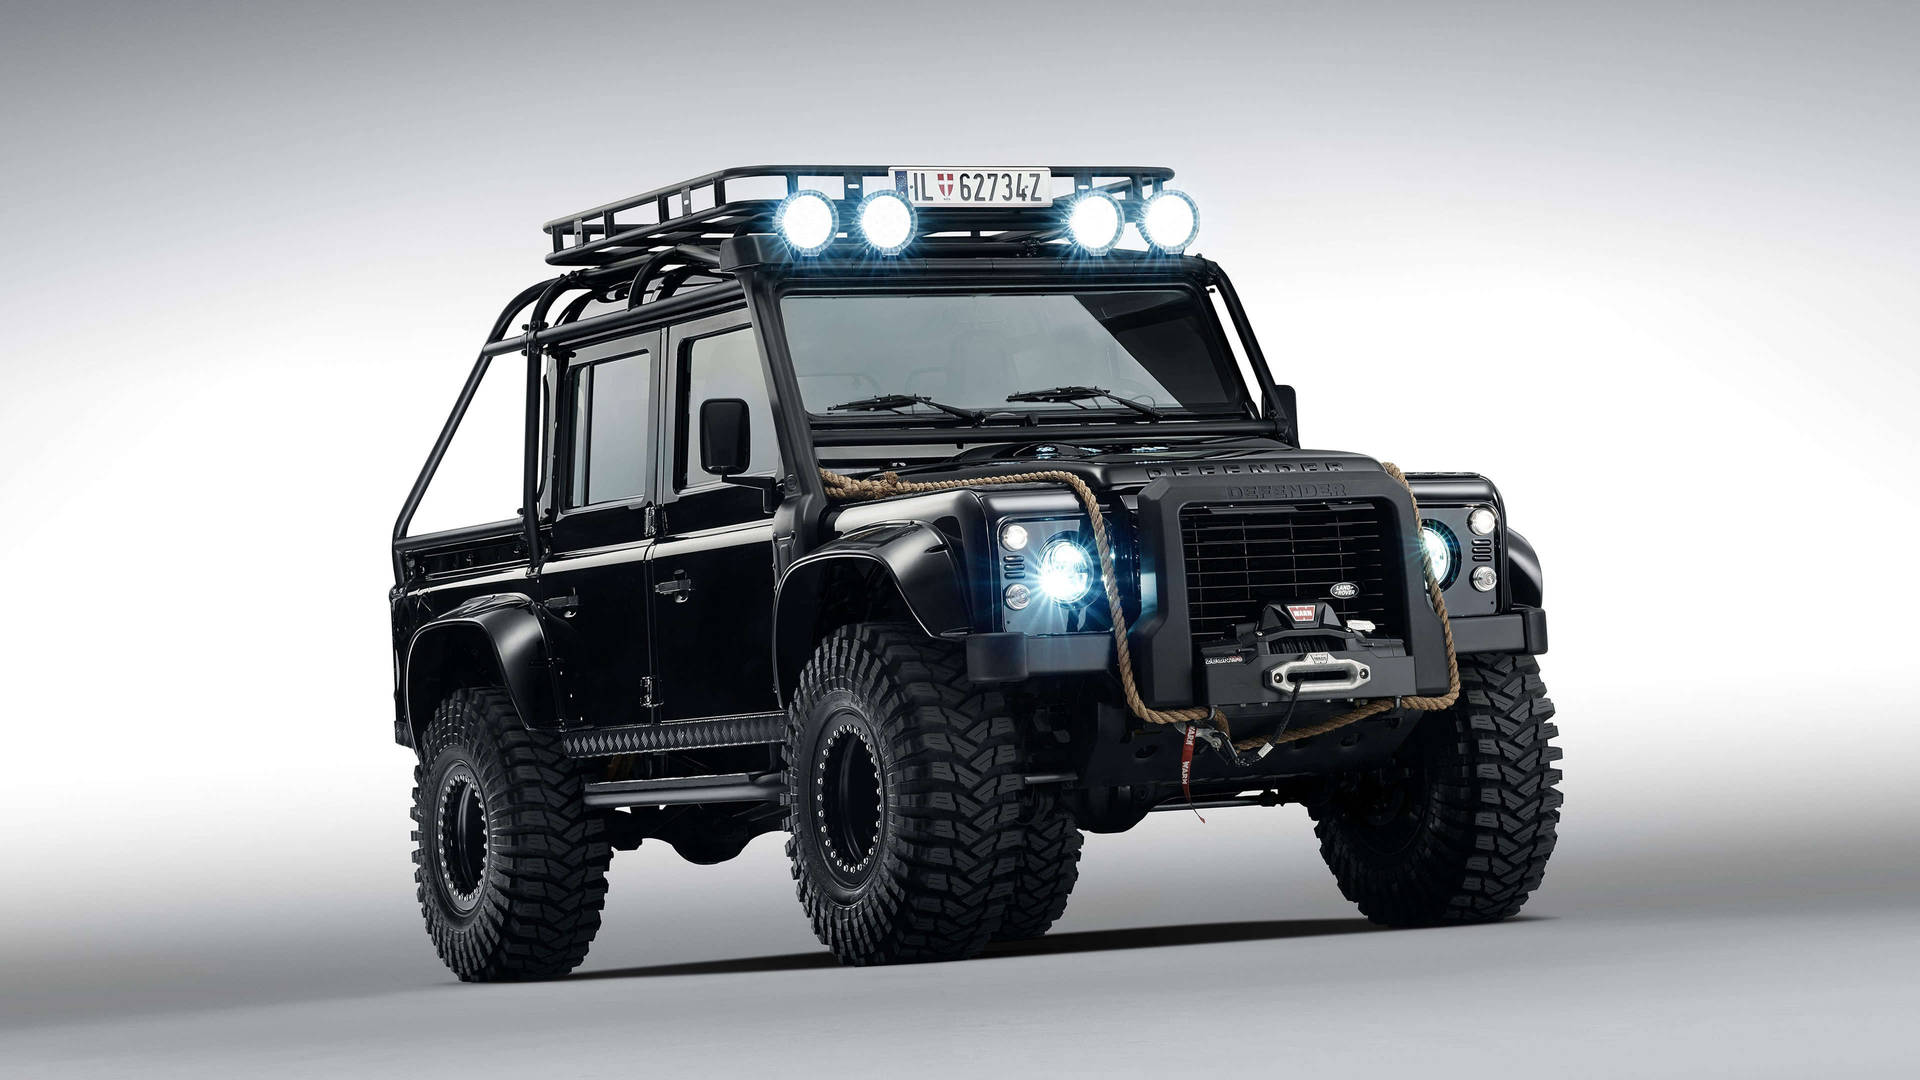 Spectre Land Rover Hd Picture